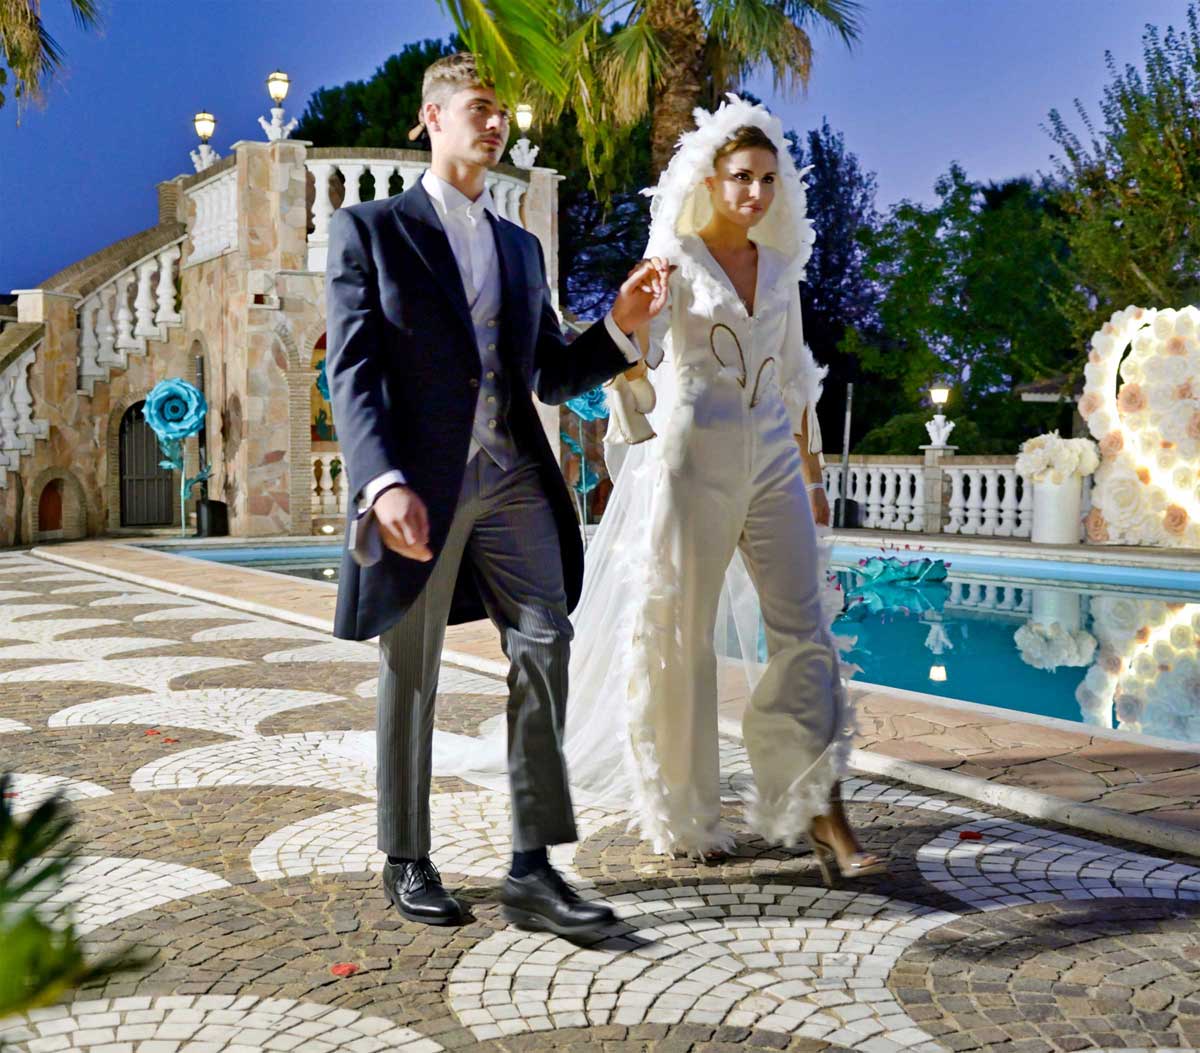 Infinity Rinascita clothes italian fashion events custom tailored suits on the catwalk at villa Fravili clothing made in italy customize shopping foto3